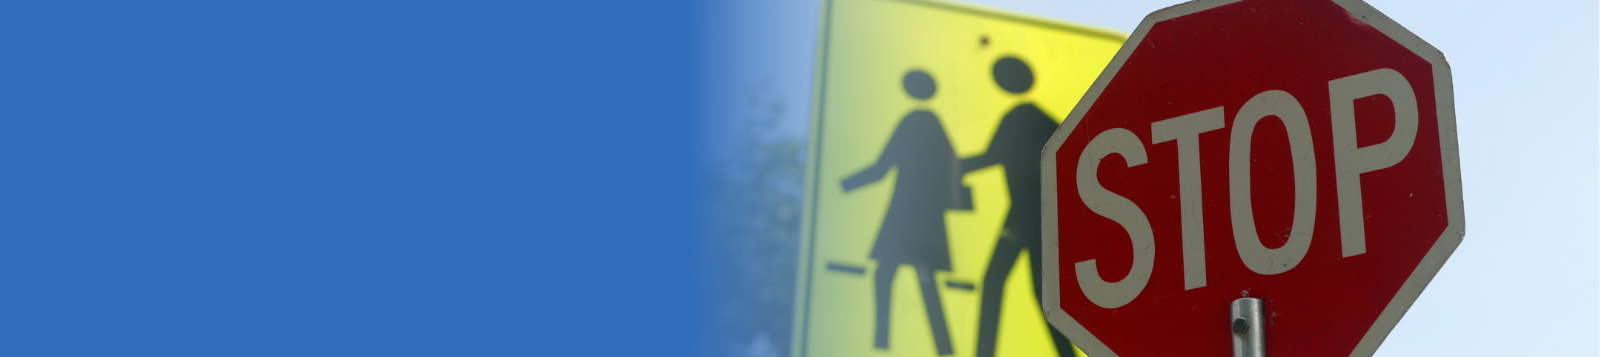 School Safety, School Crossing Sign, Pedestrian Crossing Safety System Supplier Florida - National Safety Systems, a division of Transportation Solutions and Lighting, Inc.